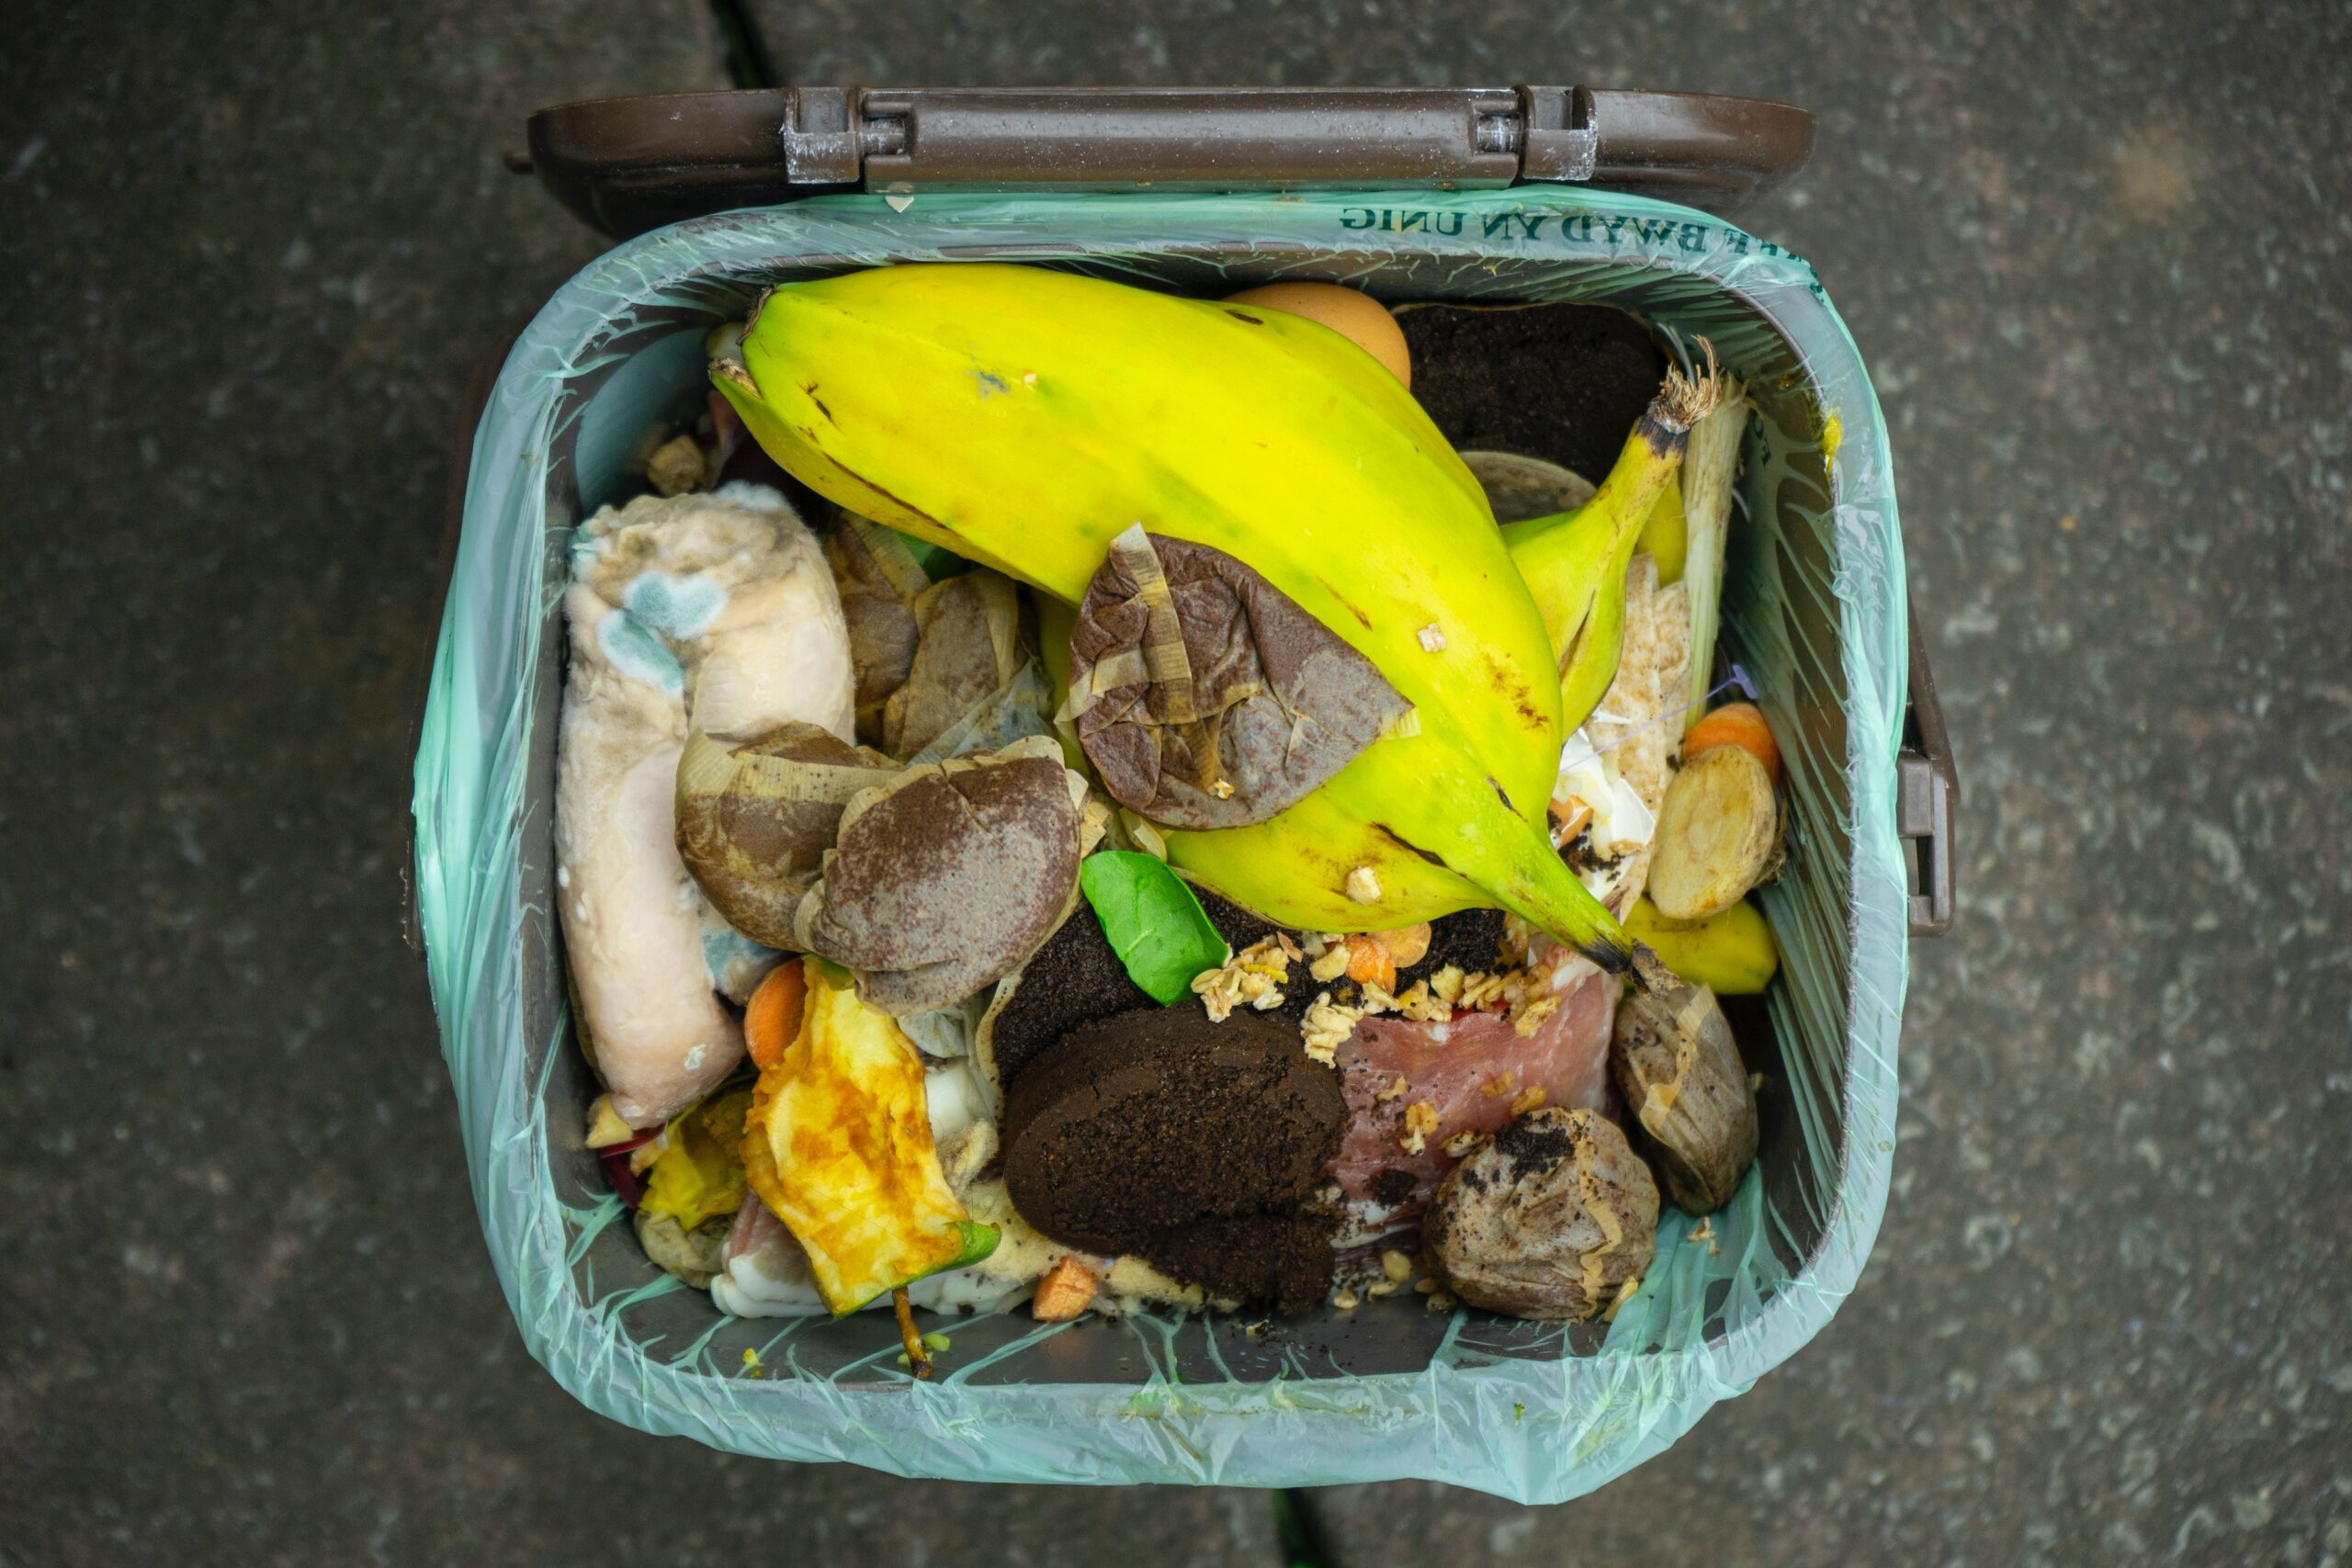 The US stinks at composting. Here’s how we can change that.